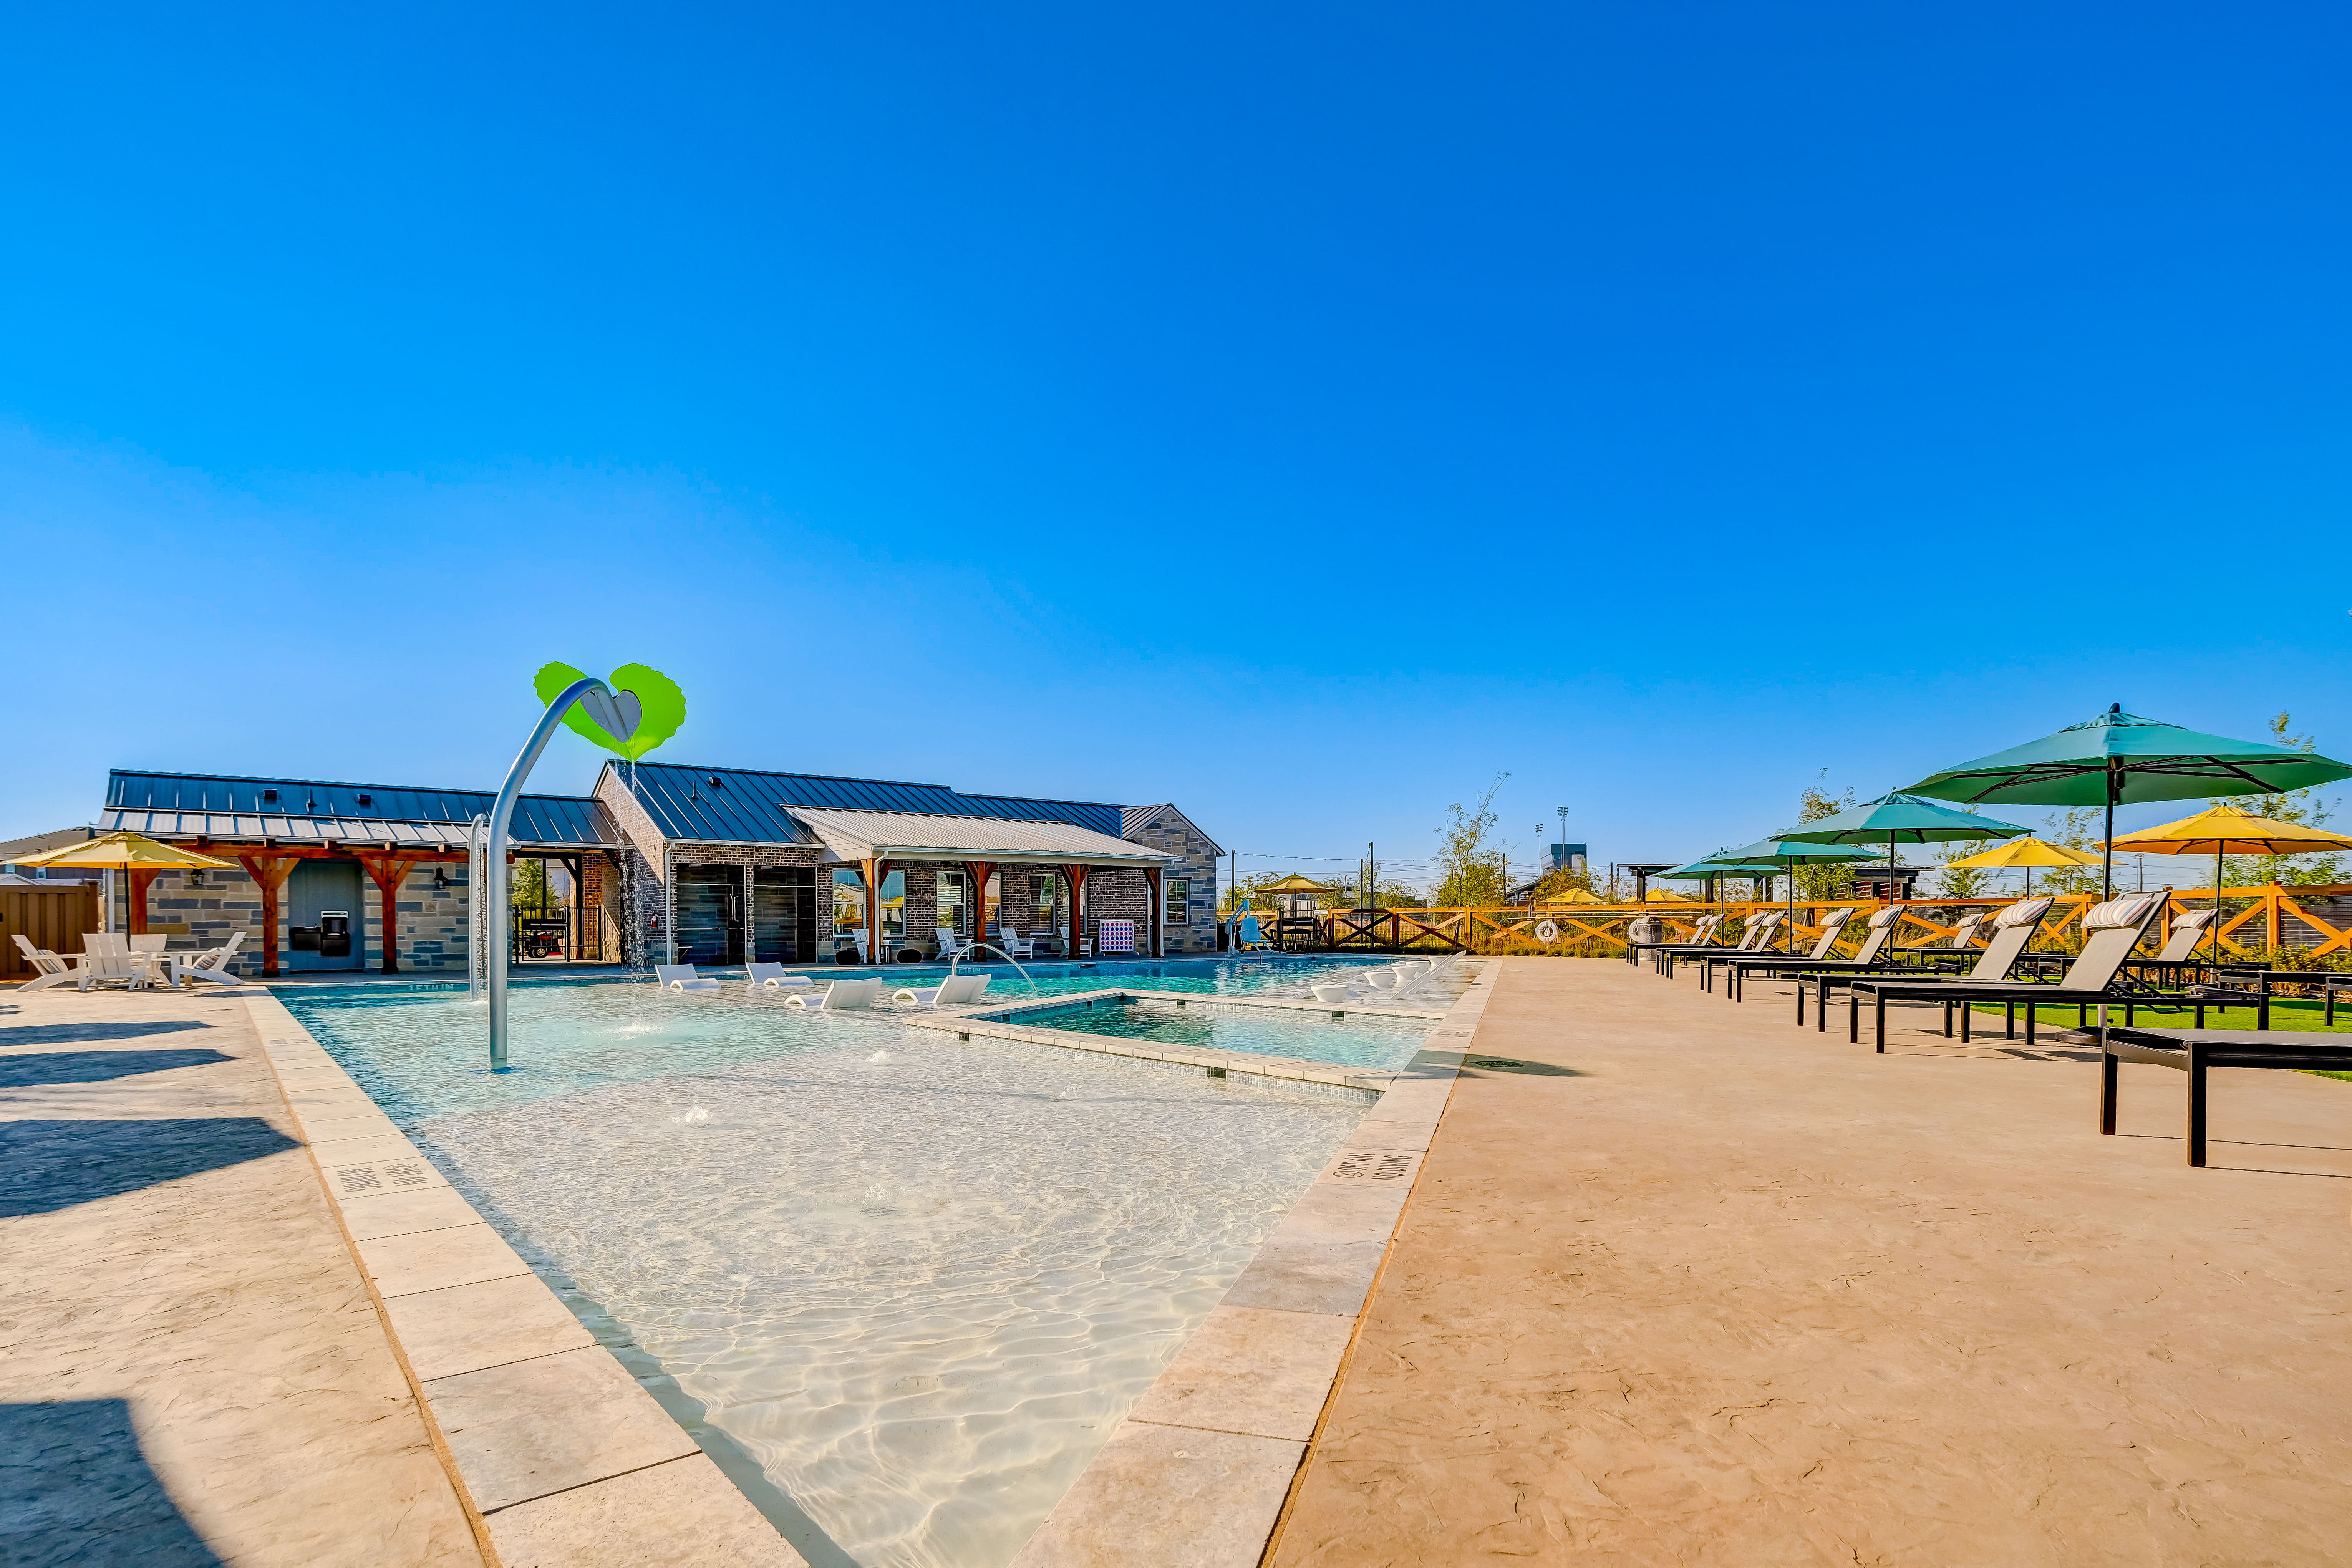 Swimming Pool and splash pad at BB Living Light Farms in Celina, Texas